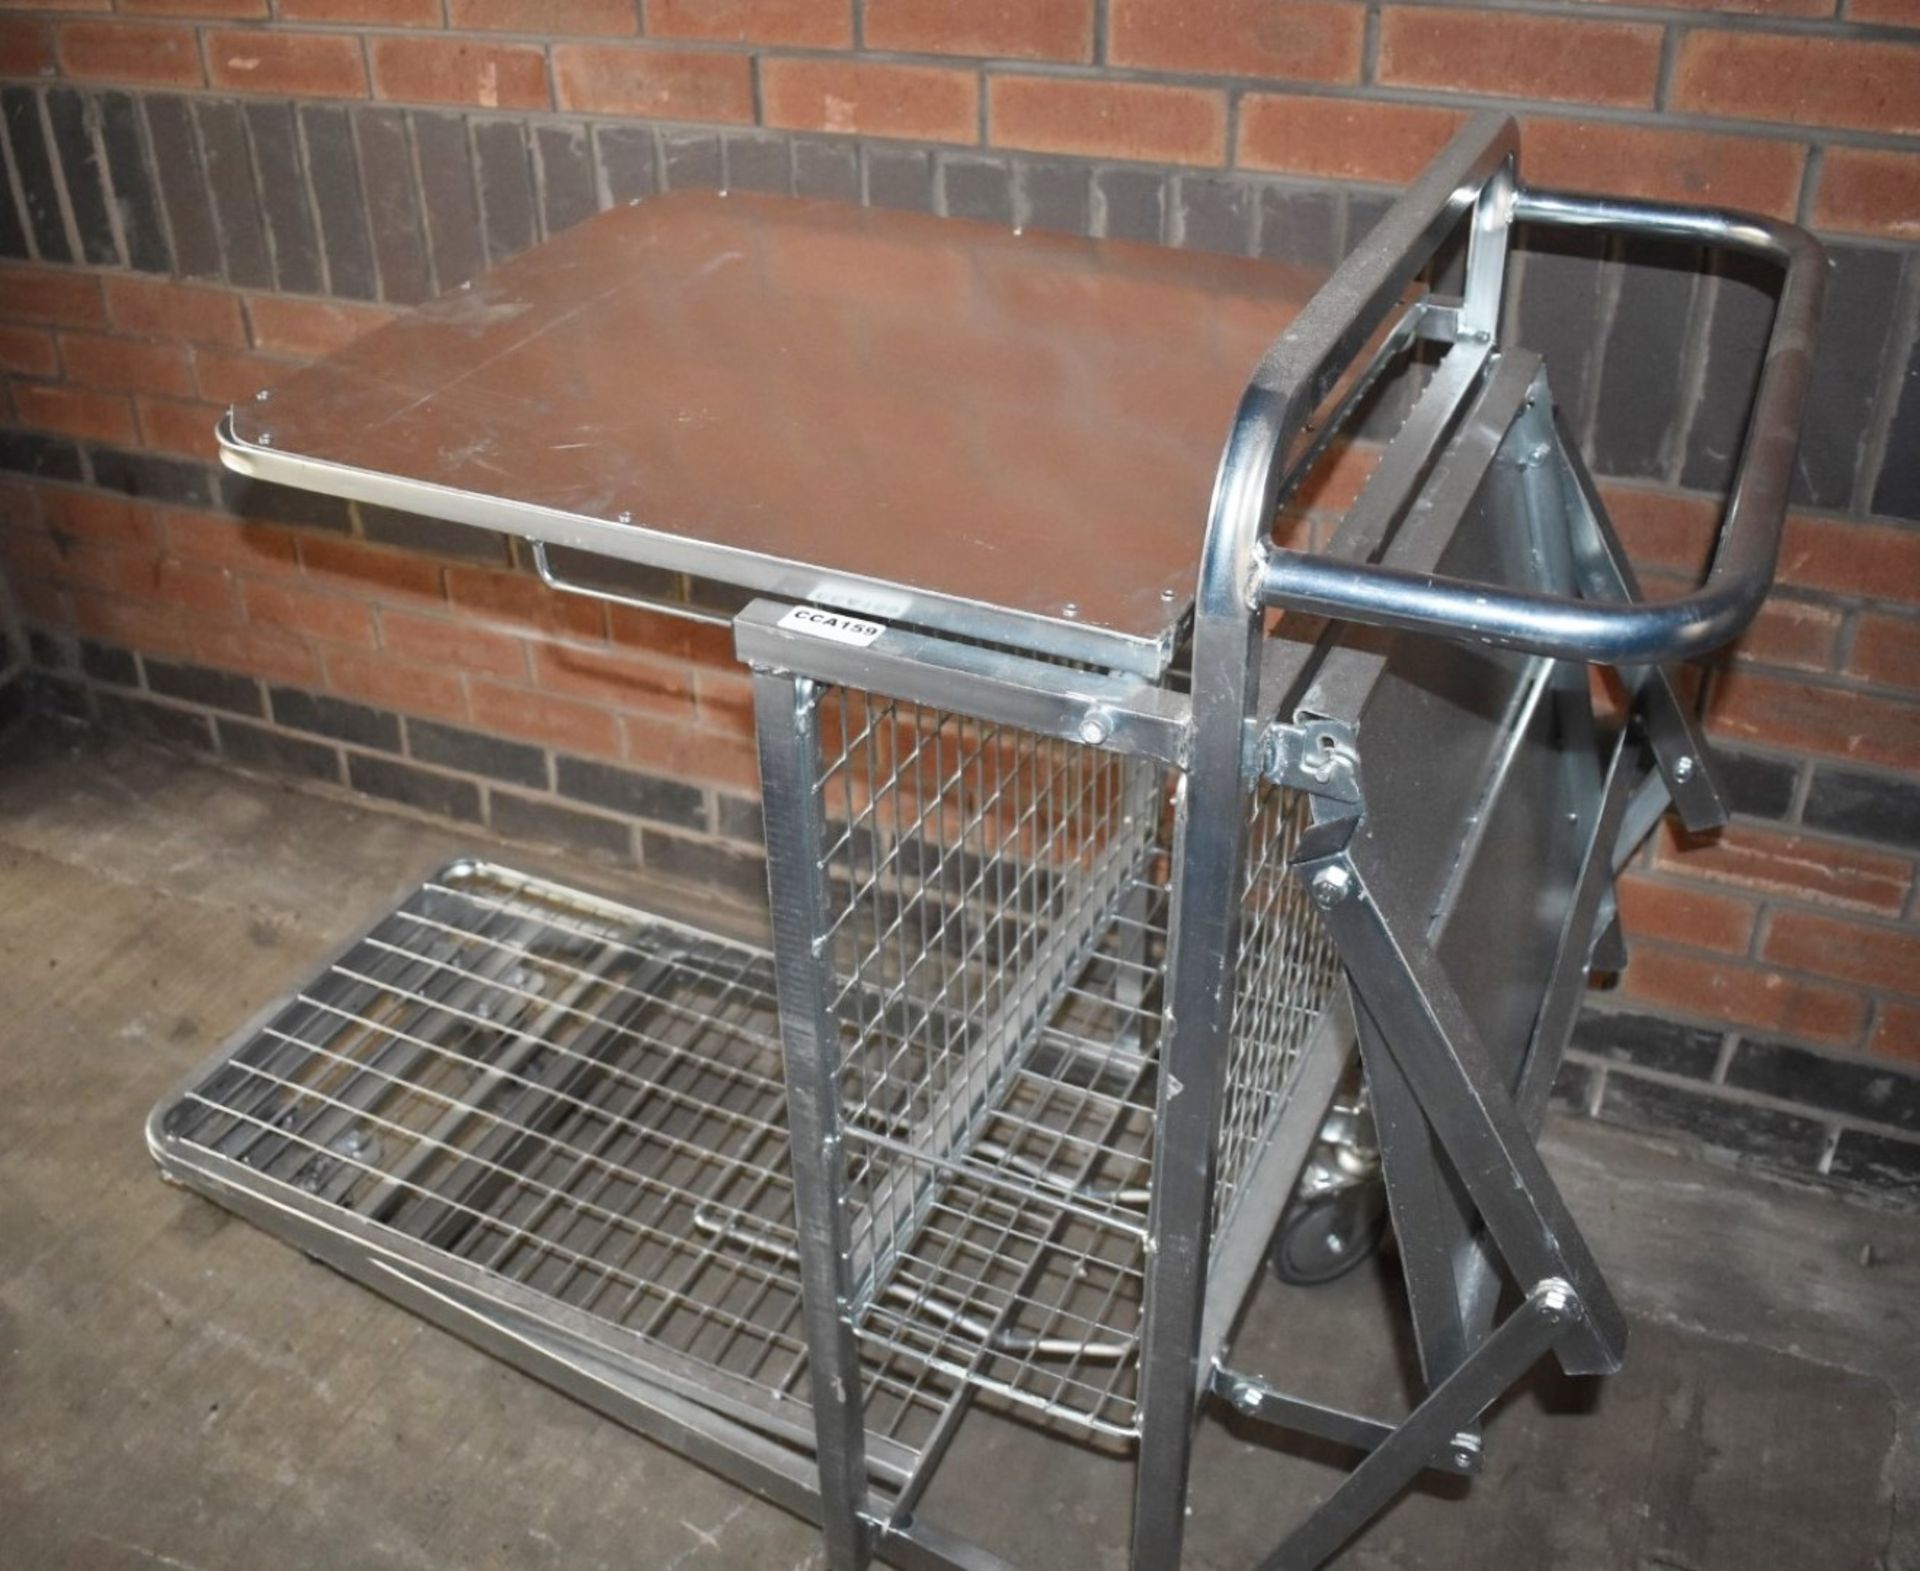 1 x Supermarket Retail Merchandising Trolley With Pull Out Step and Folding Shelf - CL595 - Ref: CCA - Image 10 of 12